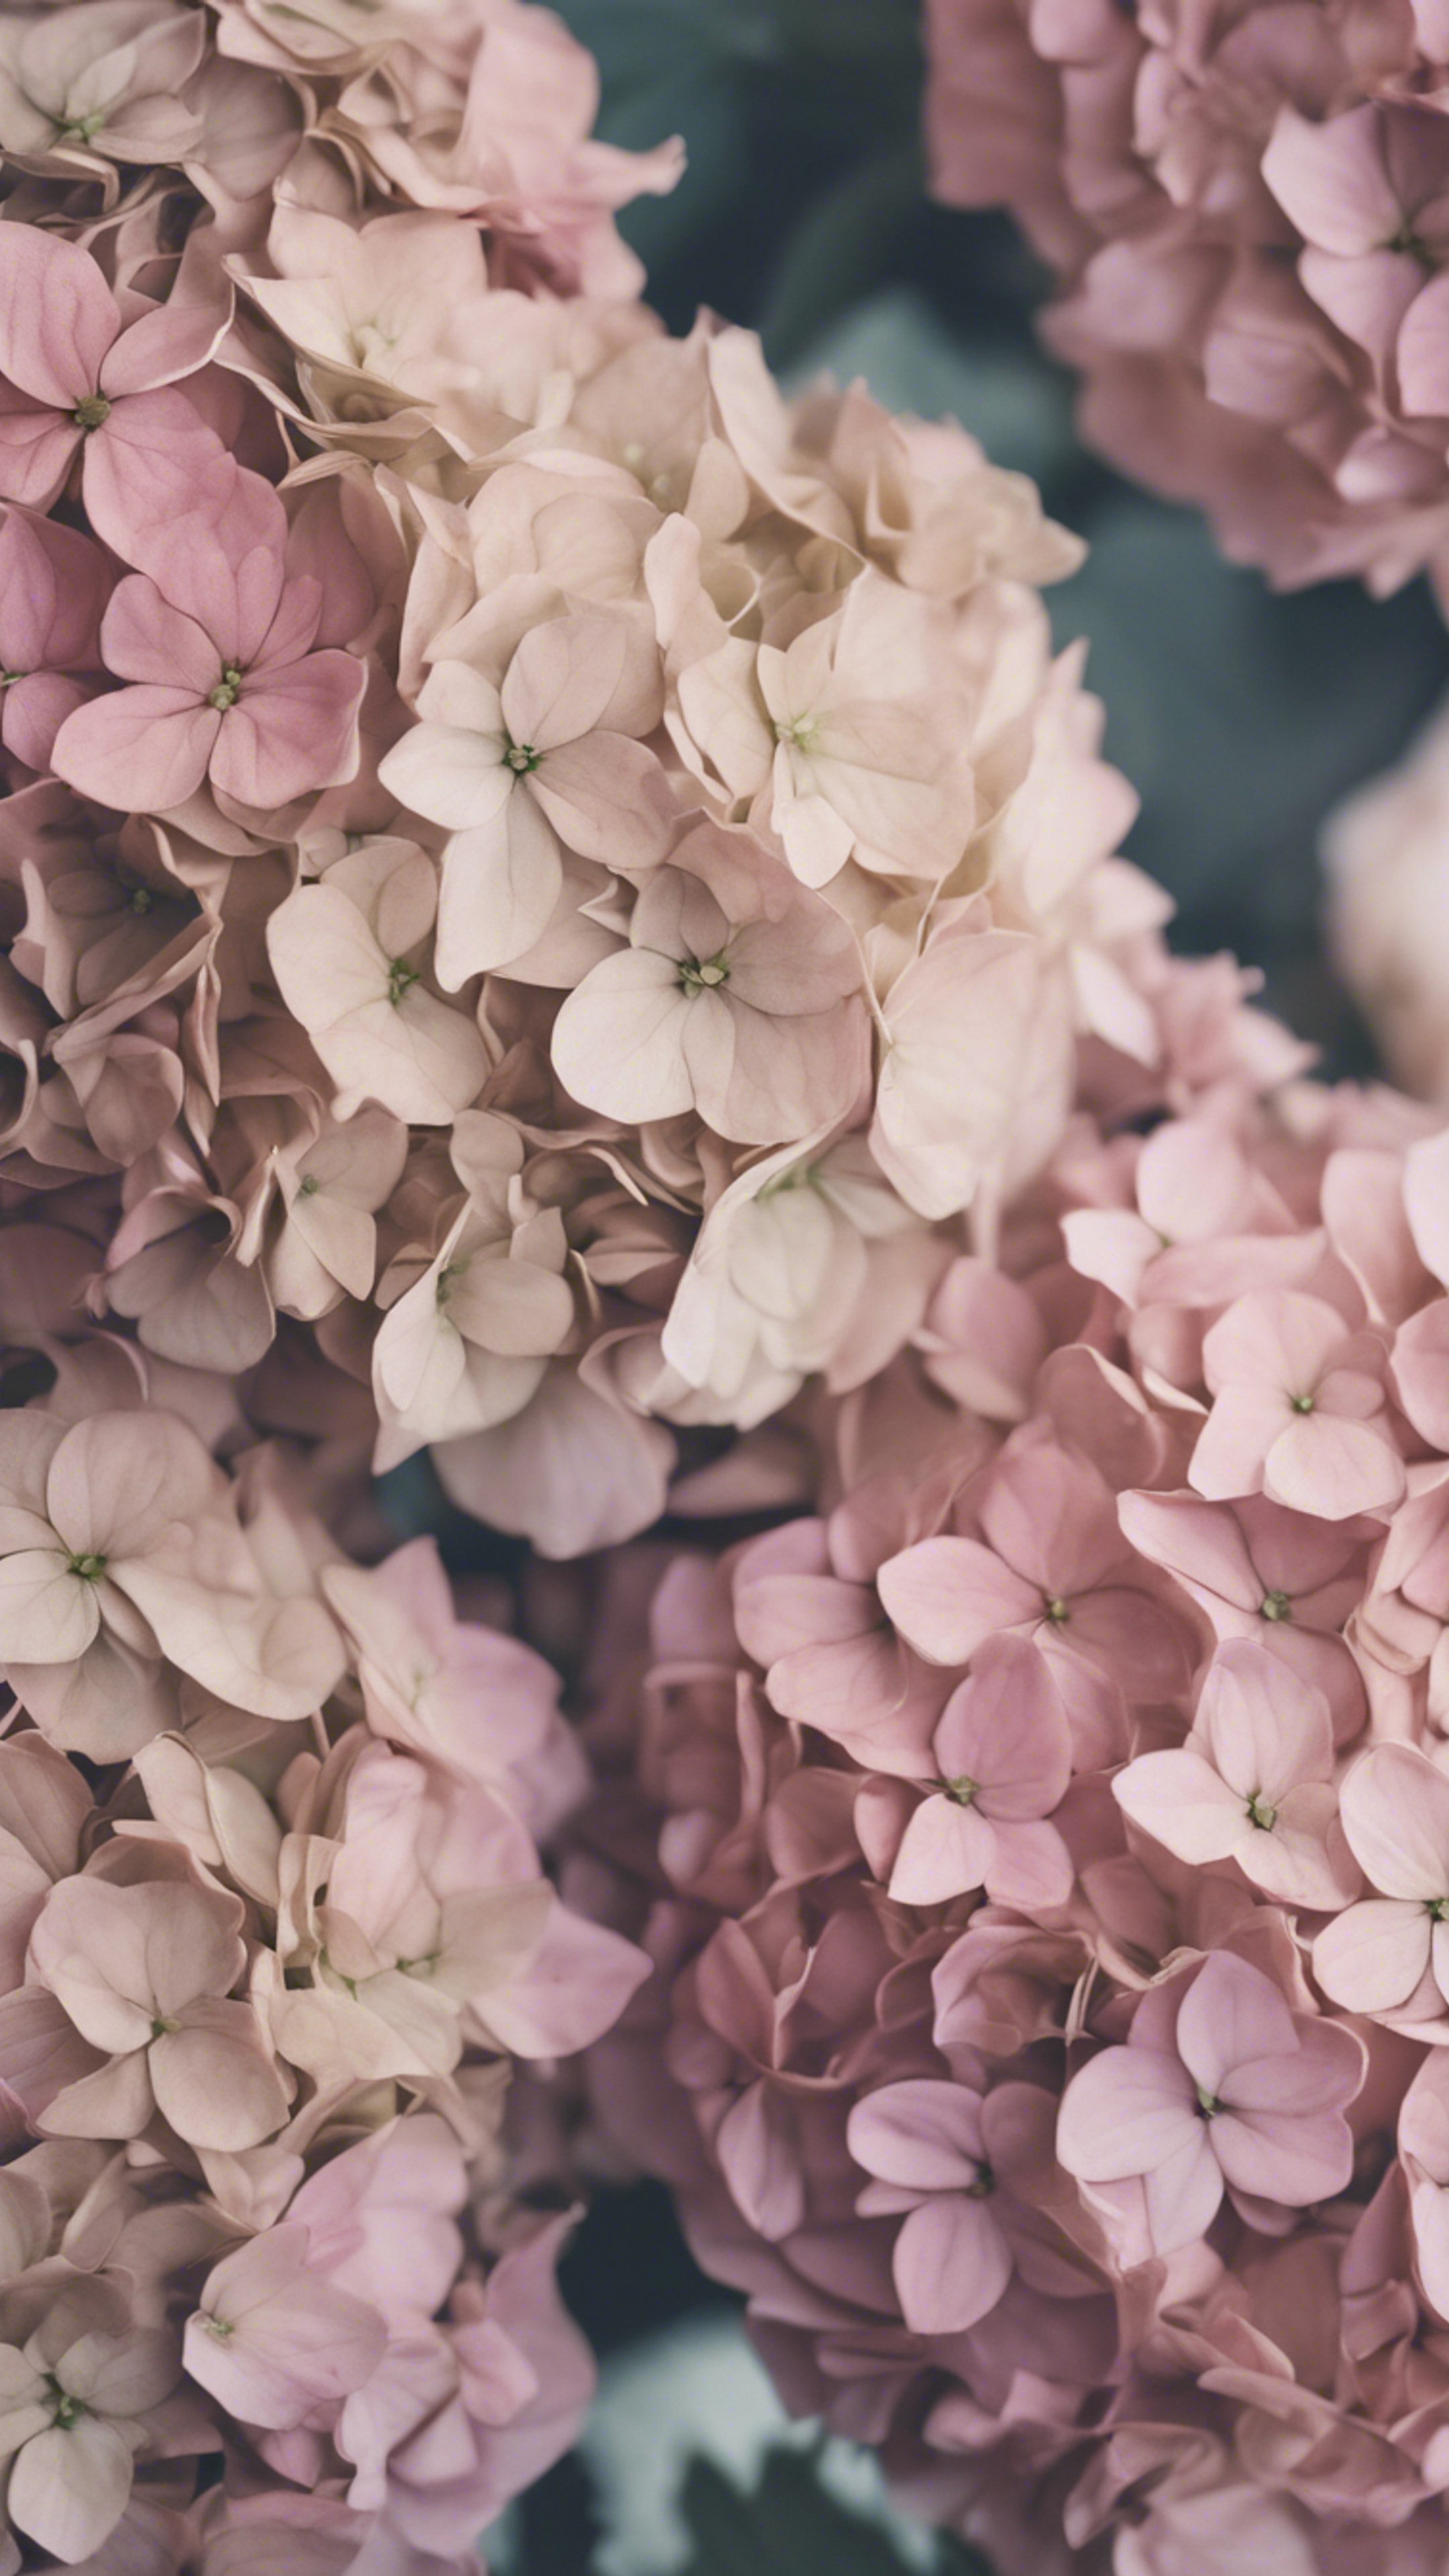 An antique floral pattern with delicate hydrangeas in a hue of vintage pink. Tapet[d61dab8ff010416797b3]